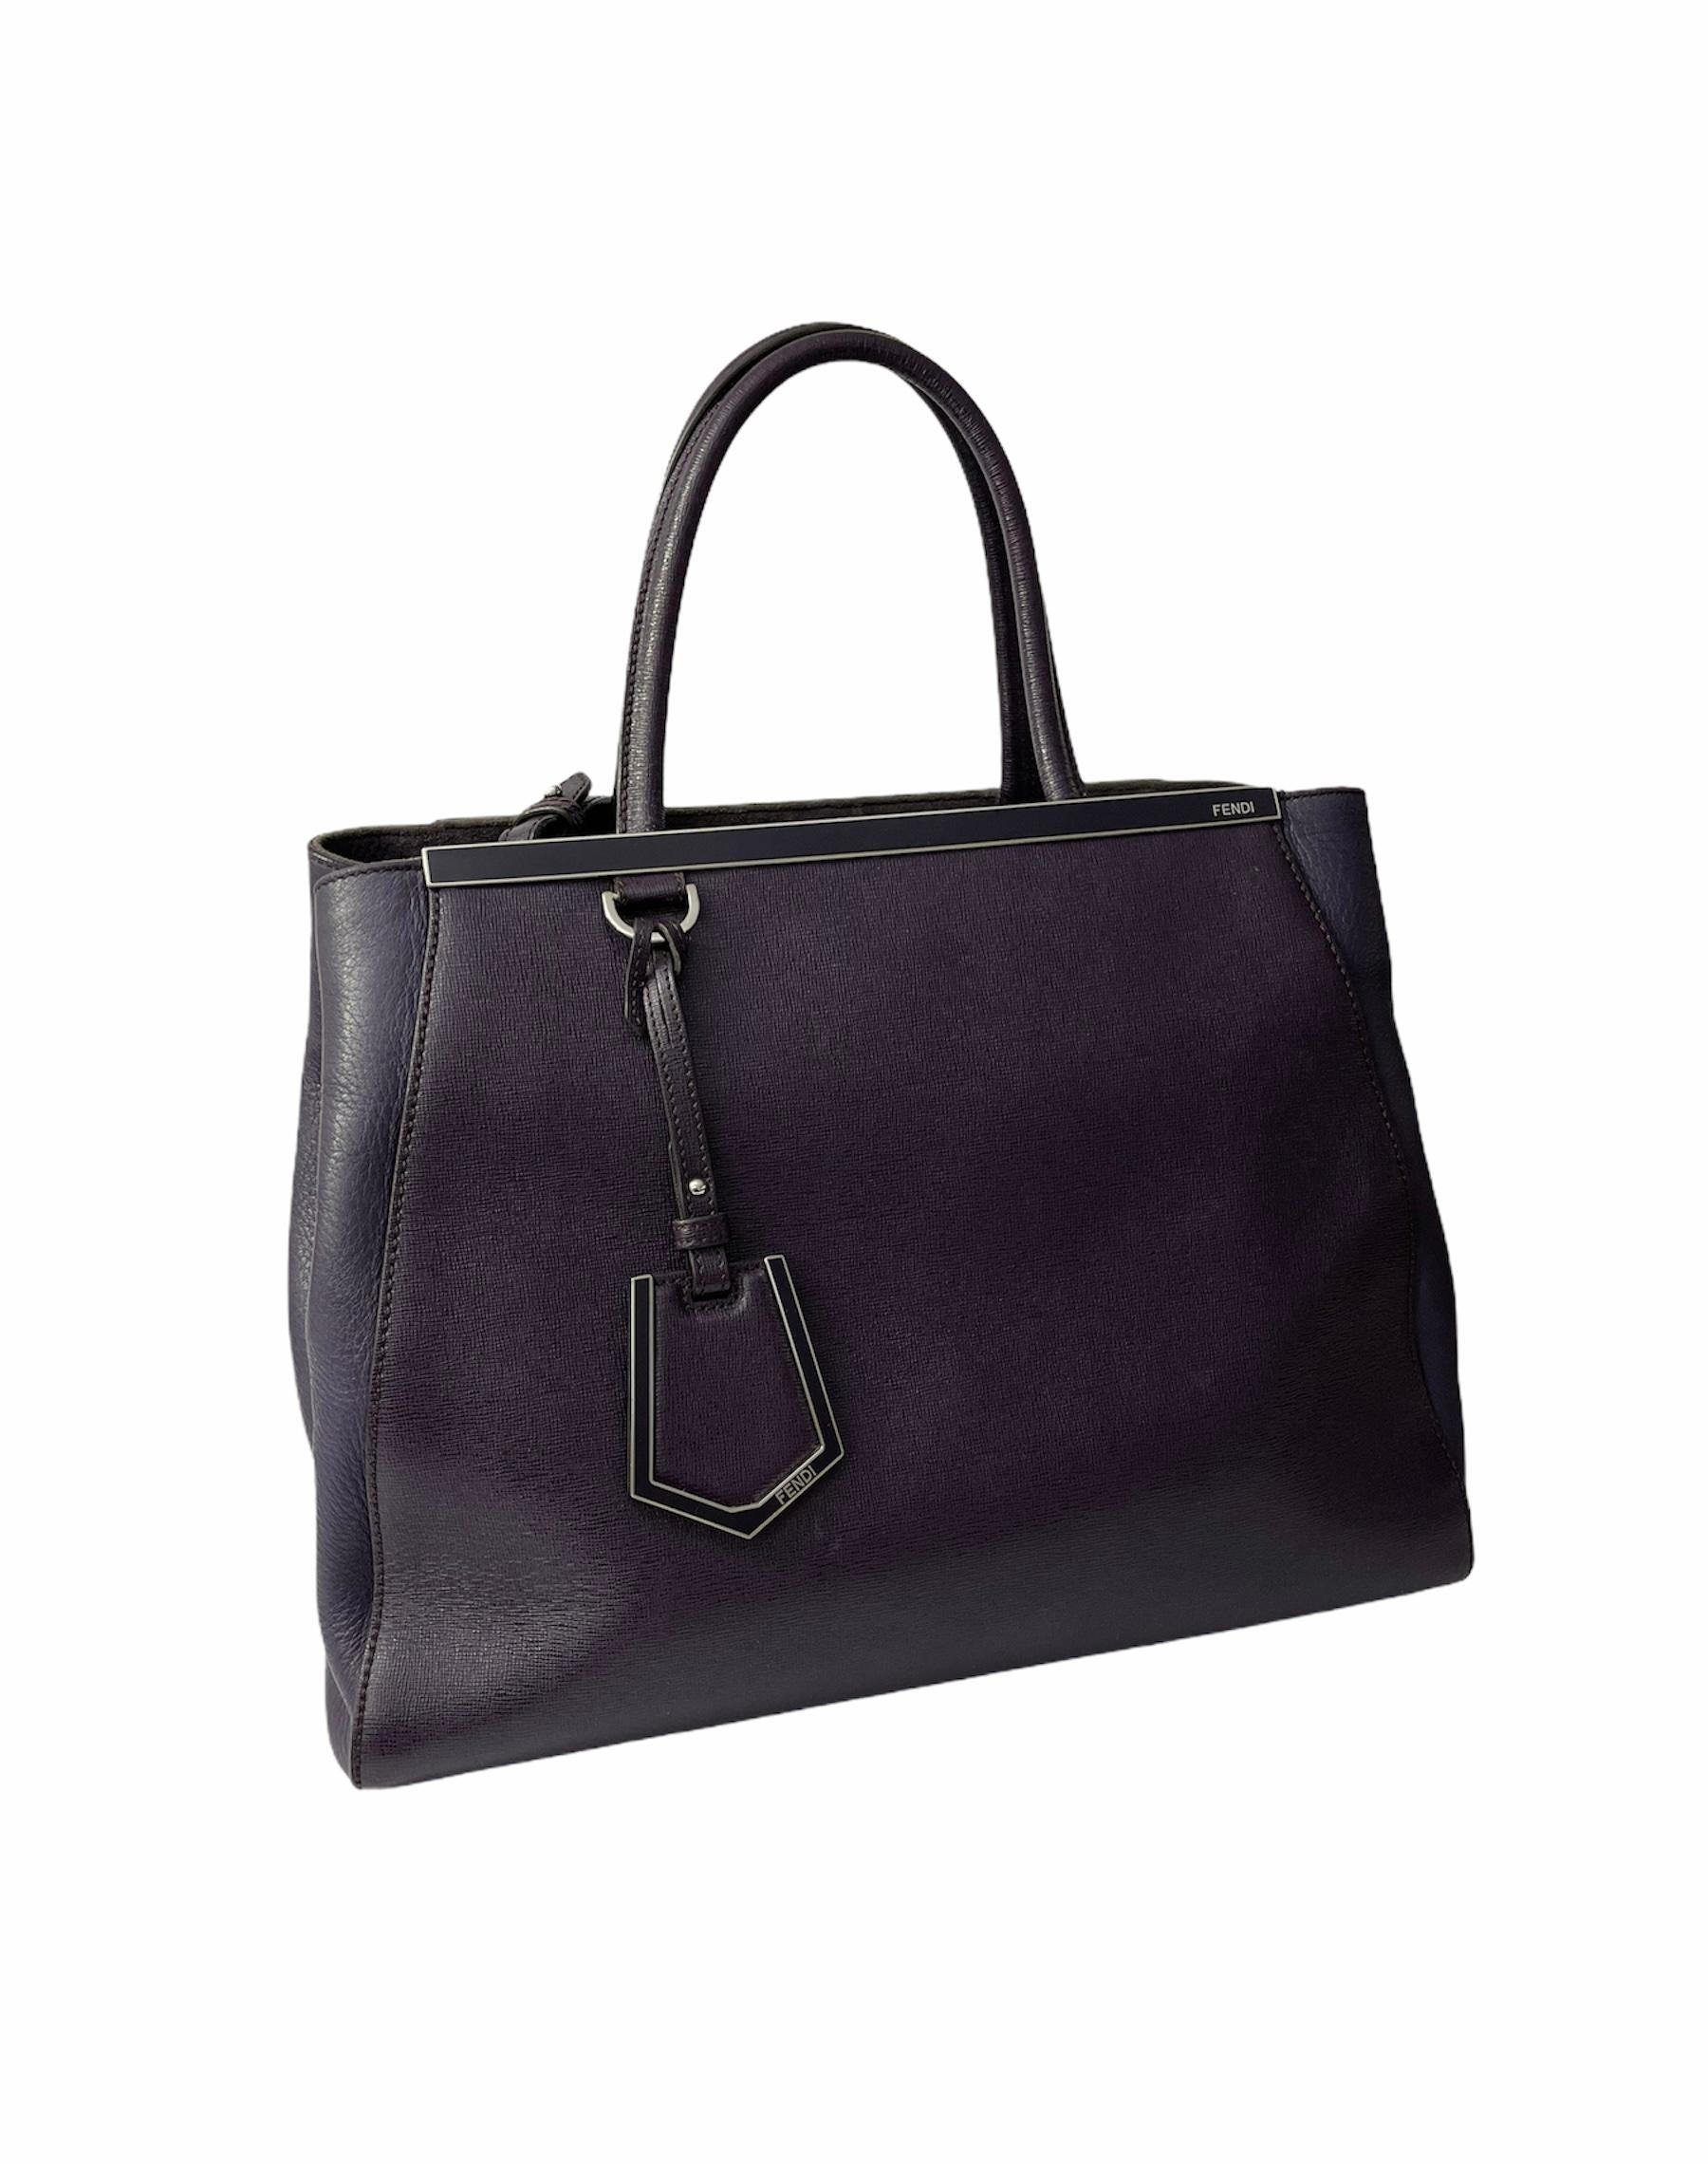 Bag signed Fendi, Toujours model, made in purple leather, with silver hardware.

The product is equipped with a button closure, internally lined in purple soft and suede, very roomy.

There are also two rigid leather handles, a 2 cm thick